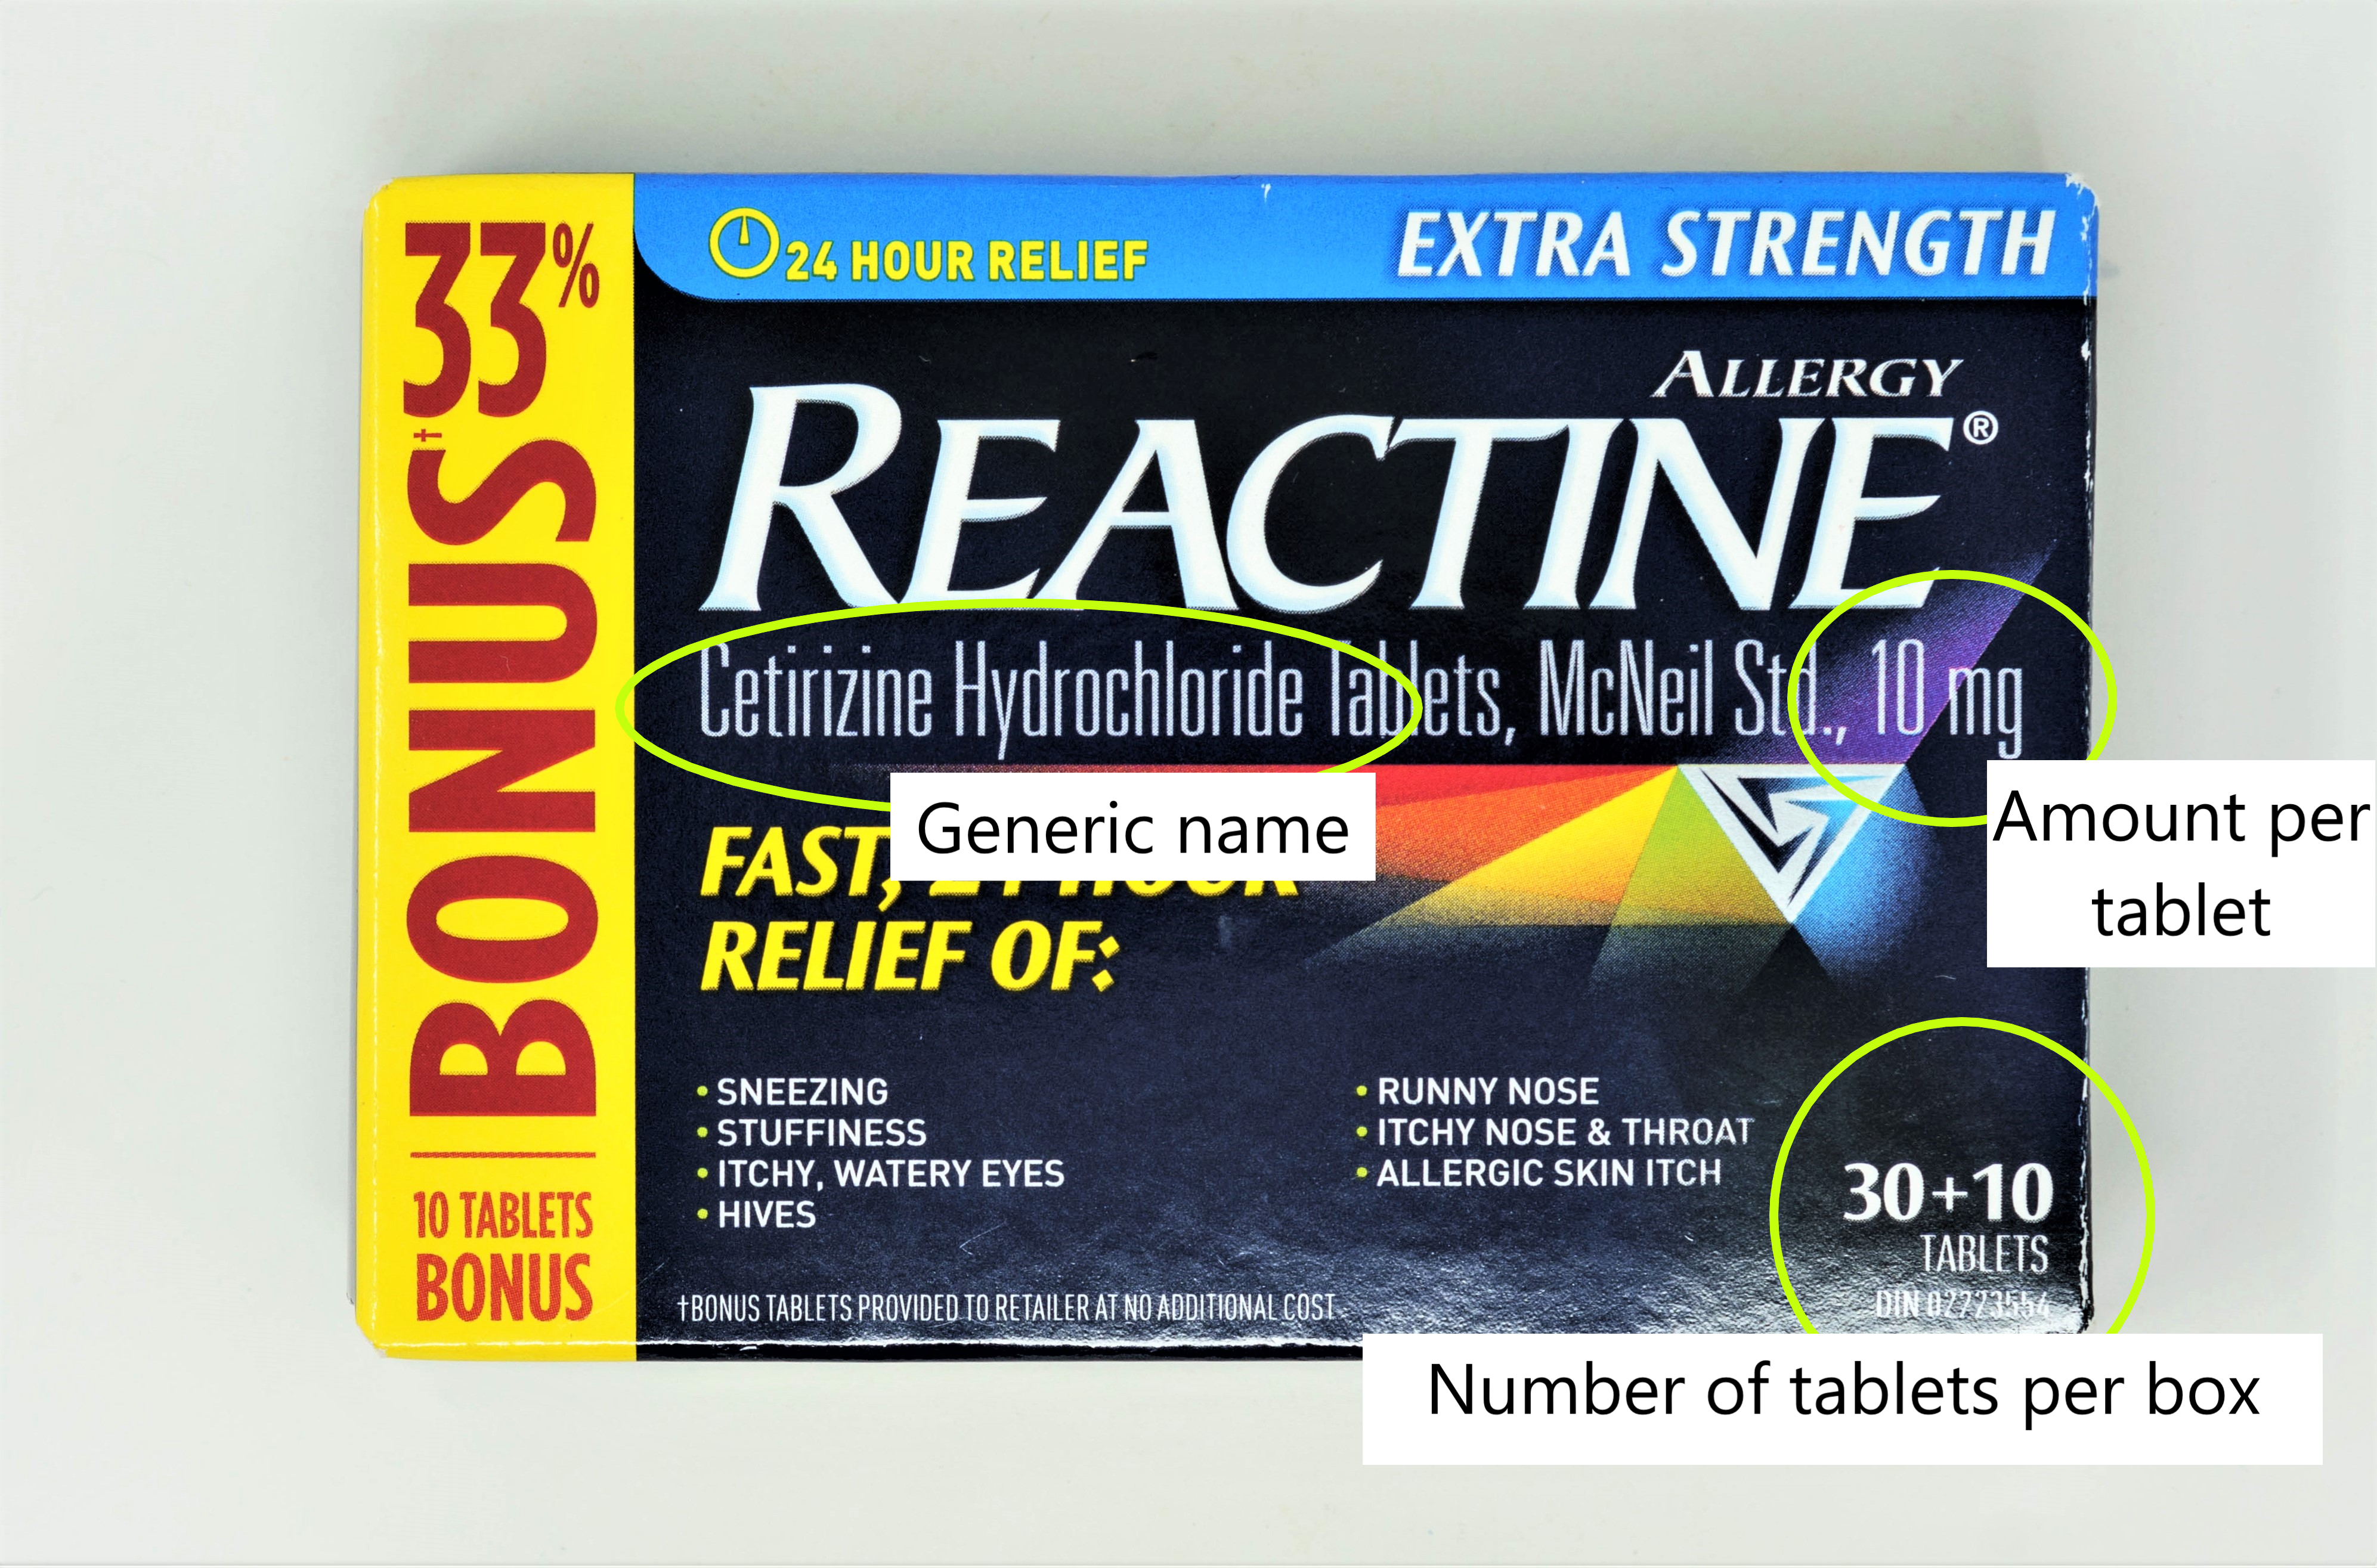 Packaging for Reactine. Cetirizine Hydrochloride Tables, 10 mg. 40 tablets.